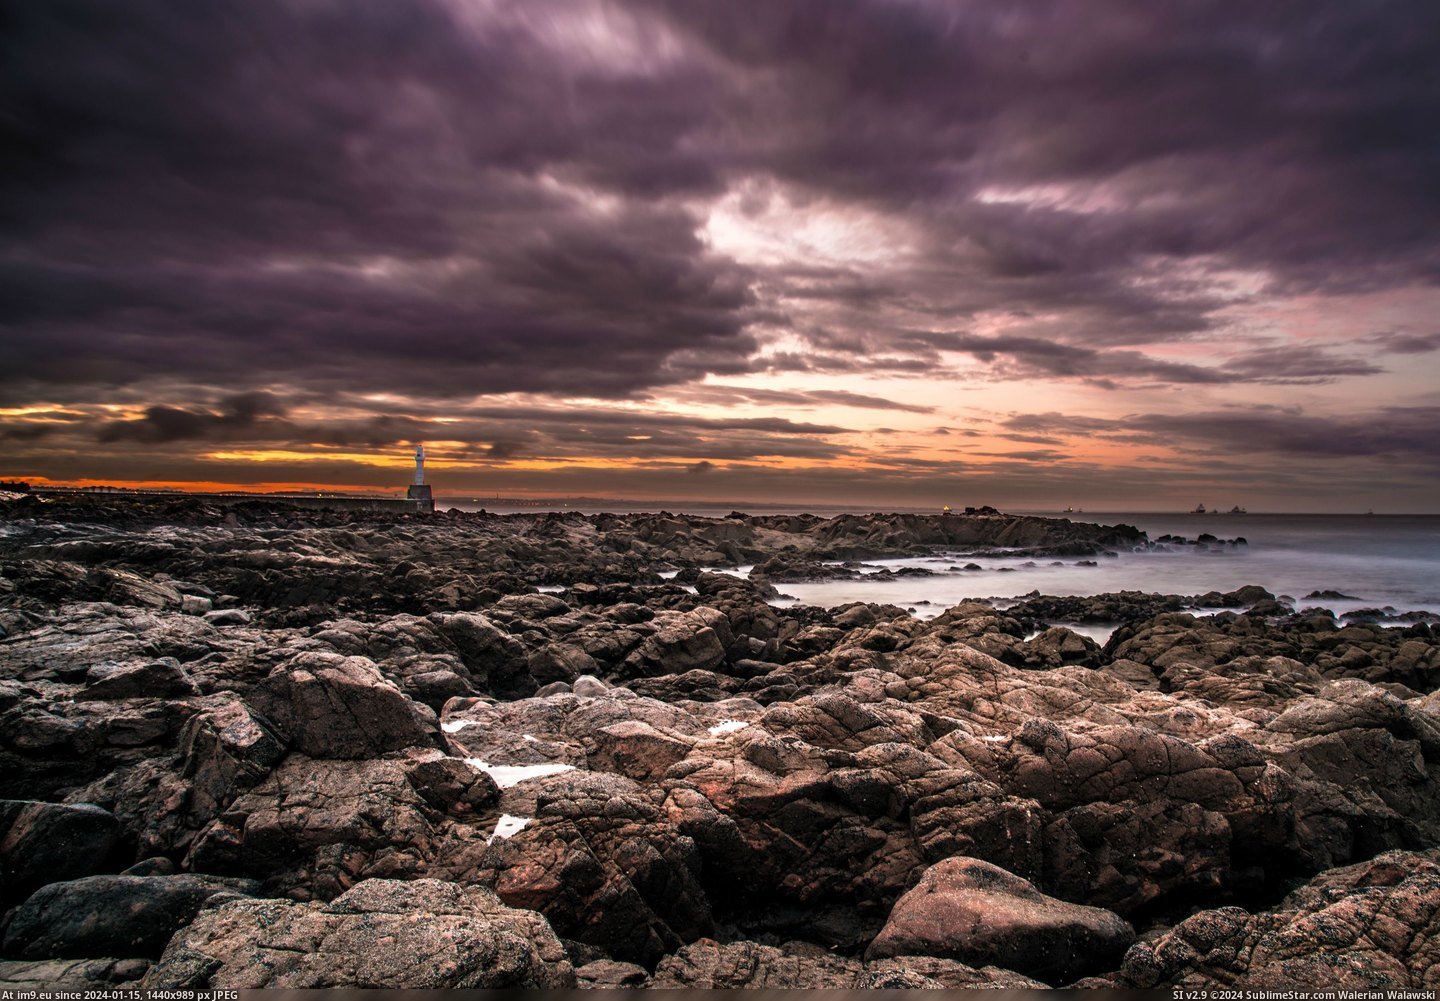 #Long #Gorgeous #Rocks #Exposure #Skies #Bay #Scotland [Earthporn] Clambered down the rocks to take this long exposure of Aberdeen bay in Scotland - some gorgeous skies on this relati Pic. (Изображение из альбом My r/EARTHPORN favs))